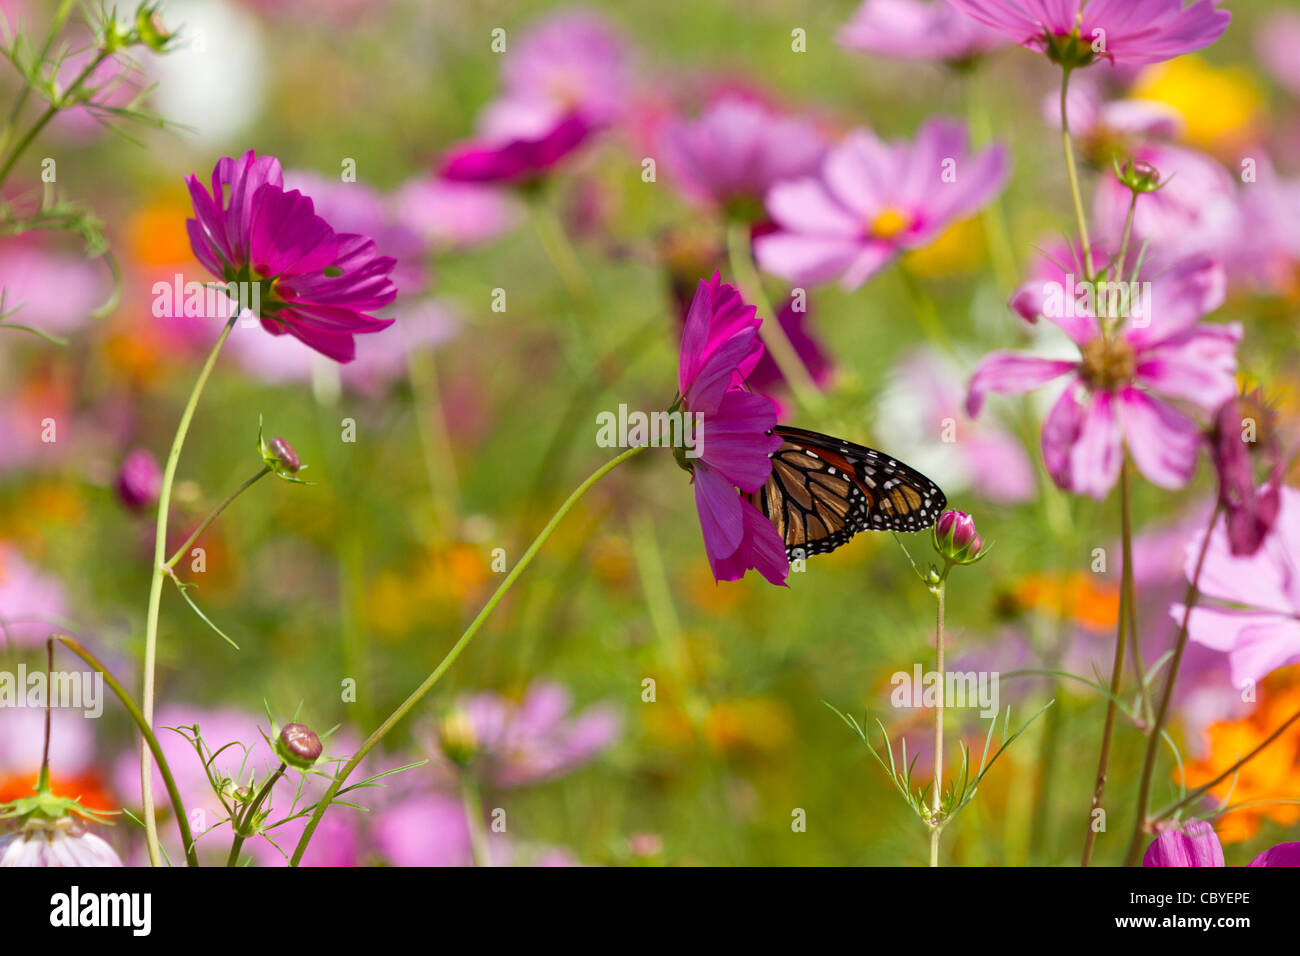 Summer wildflowers with monarch butterfly. Stock Photo